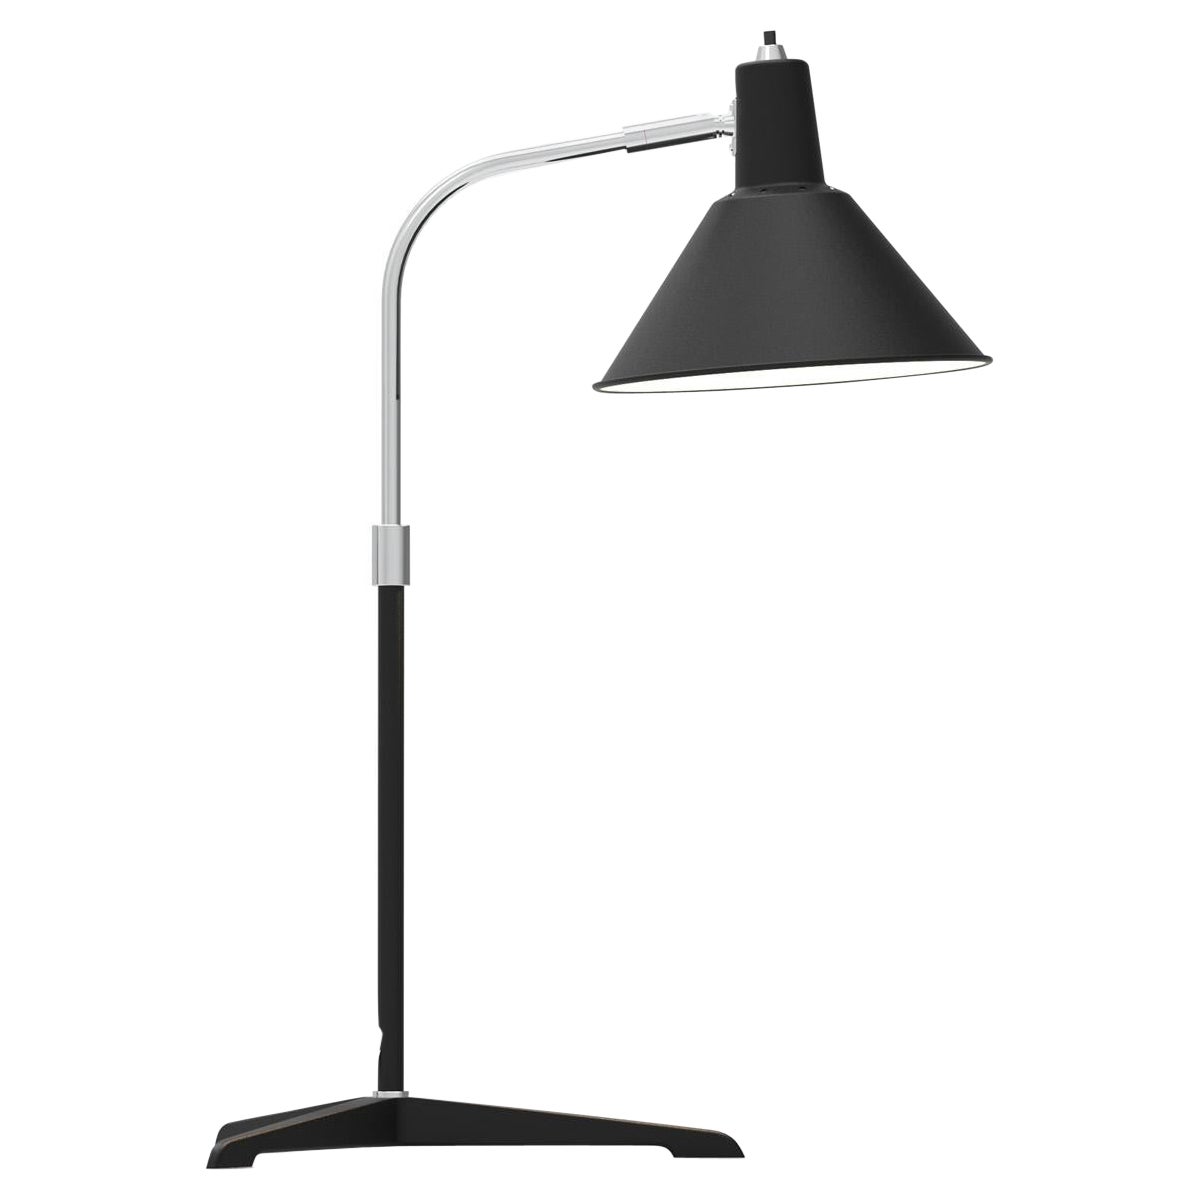 Arcon Table Lamp in Black/Chrome - By NUAD